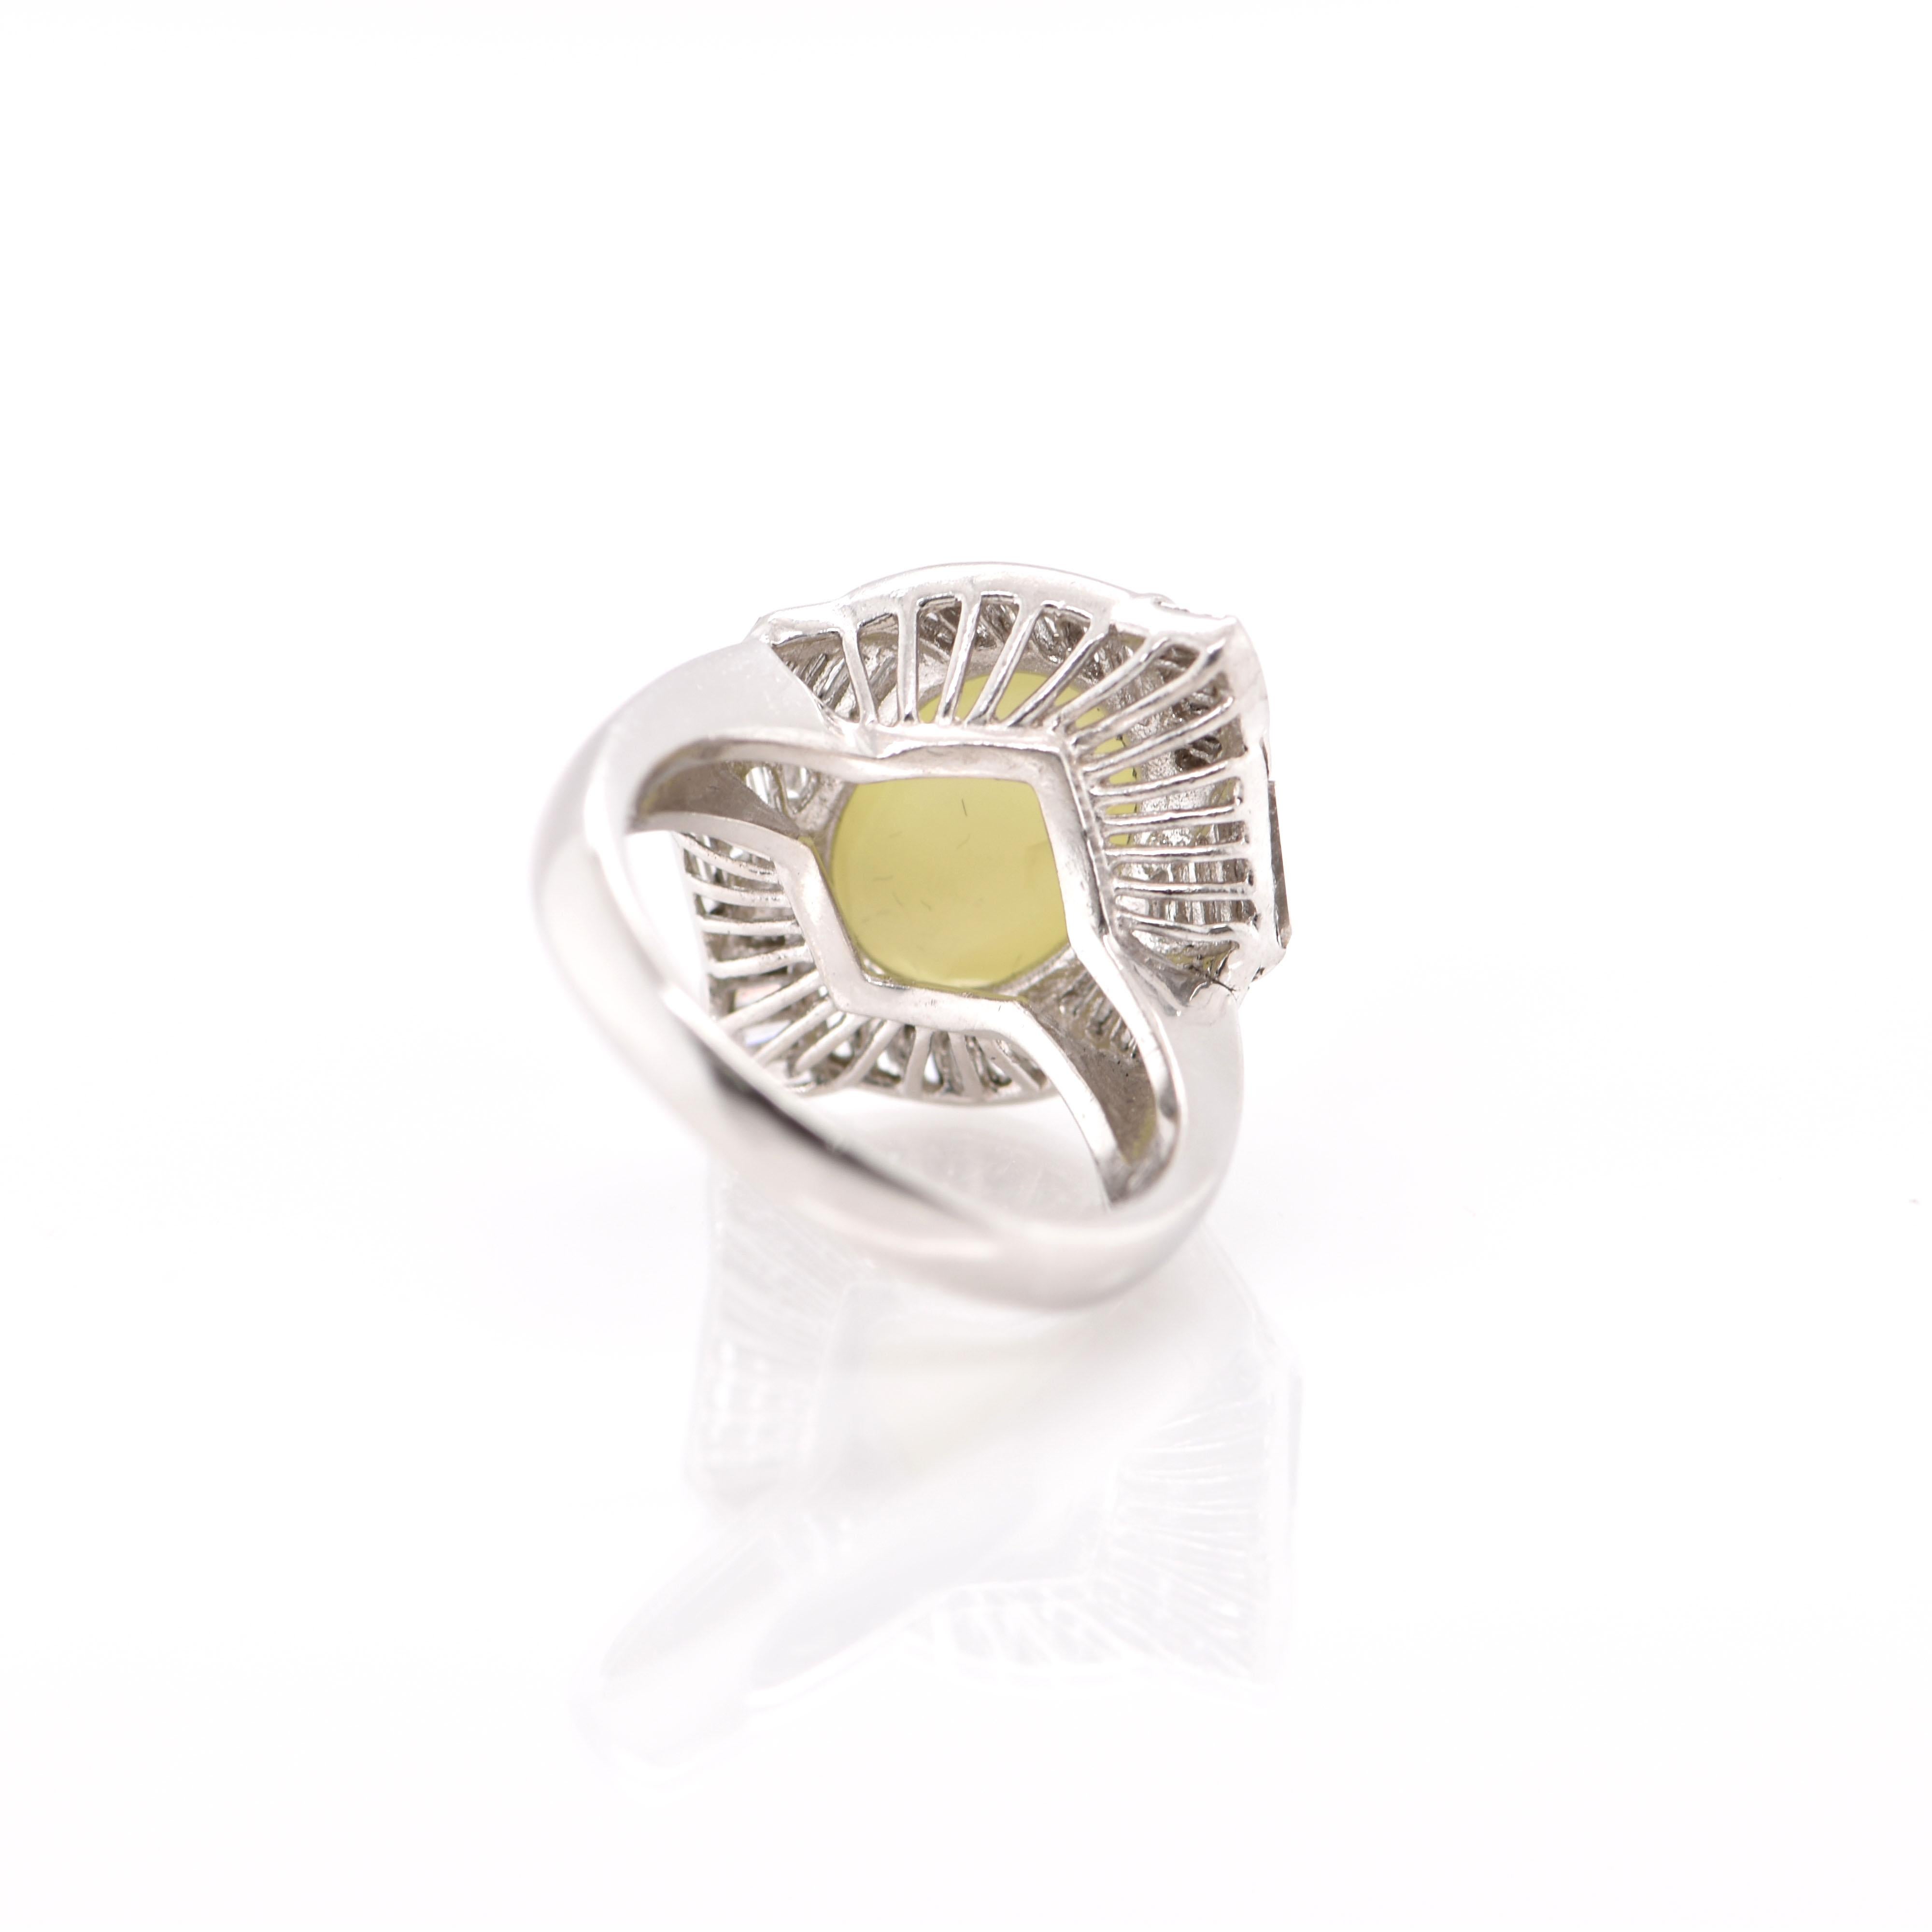 A stunning Cocktail Ring featuring a 7.71 Carat Cat's Eye Chrysoberyl and 0.78 Carats of Baguette Diamond Accents set in Platinum. Cat's Eye Chrysoberyl exhibit a unique, naturally occurring phenomena called Chatoyancy or 